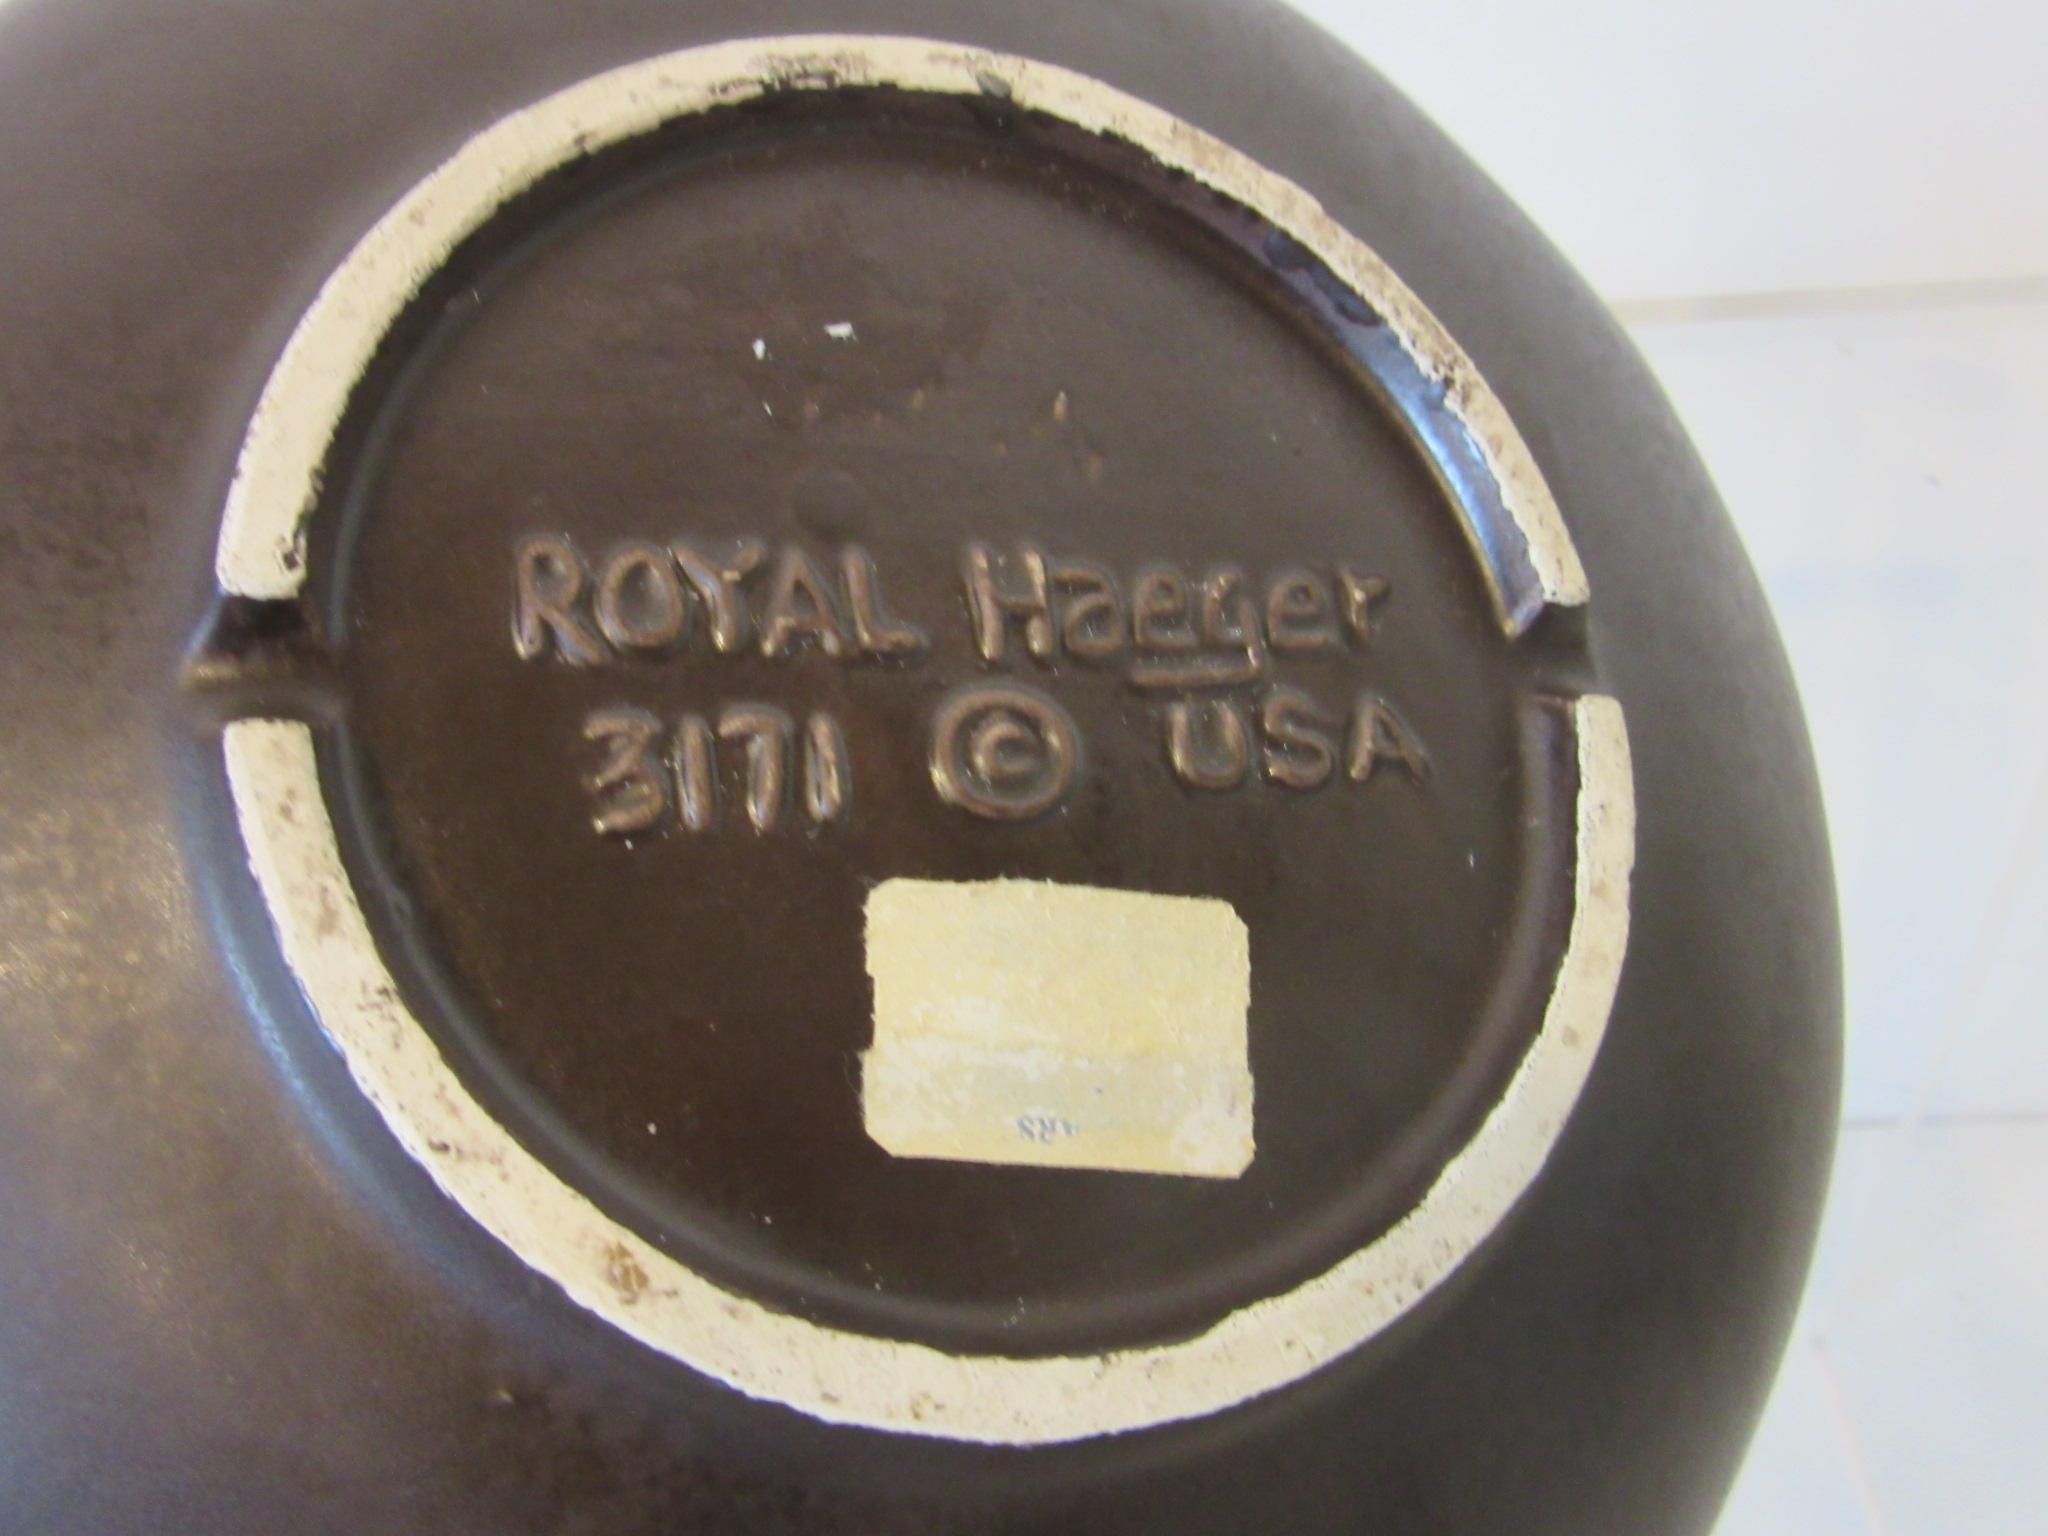 Earth Wrap Pottery Bowls for Royal Haeger Pottery Co. 5